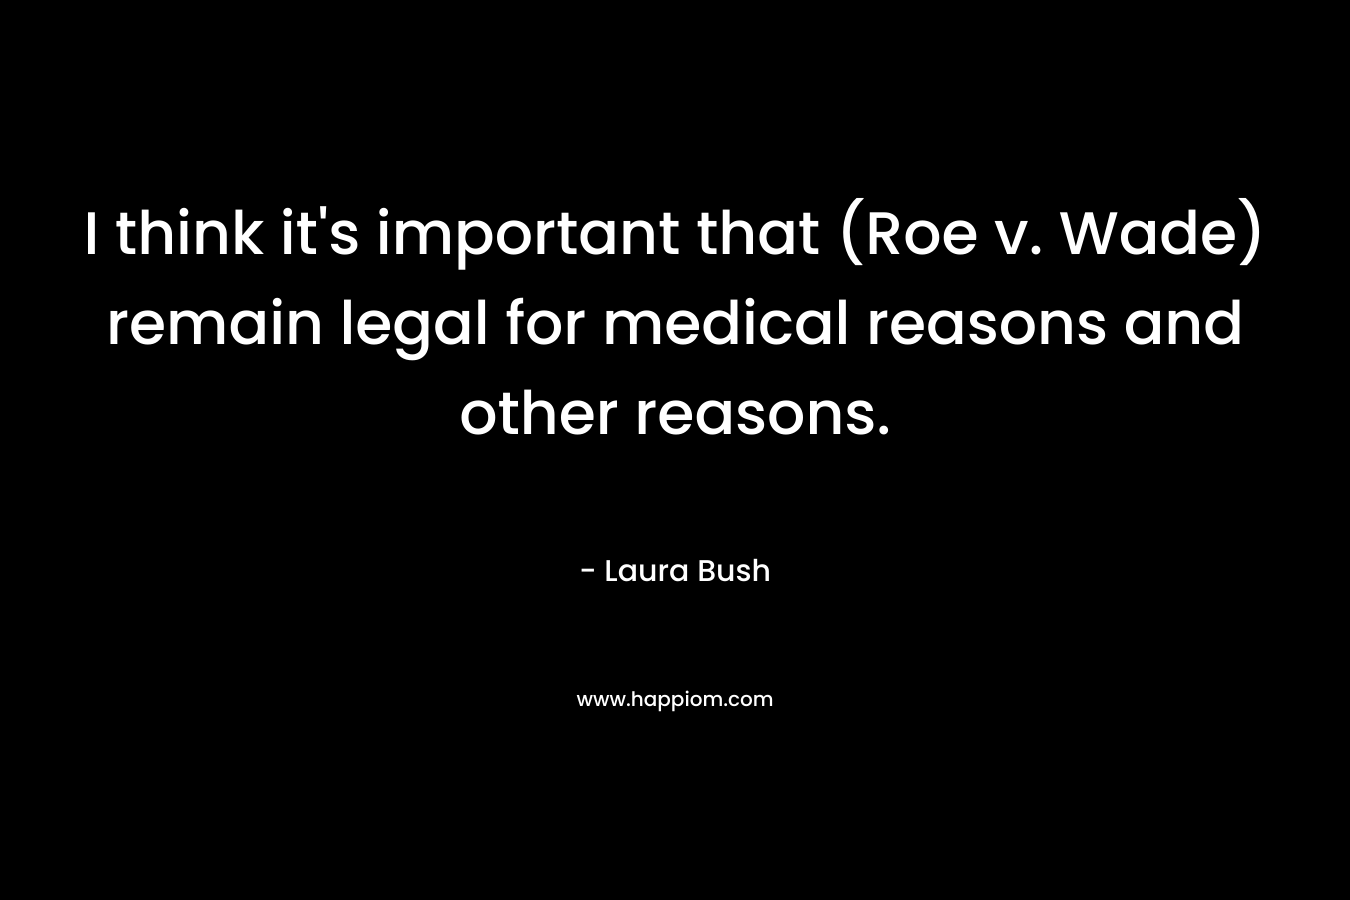 I think it's important that (Roe v. Wade) remain legal for medical reasons and other reasons.